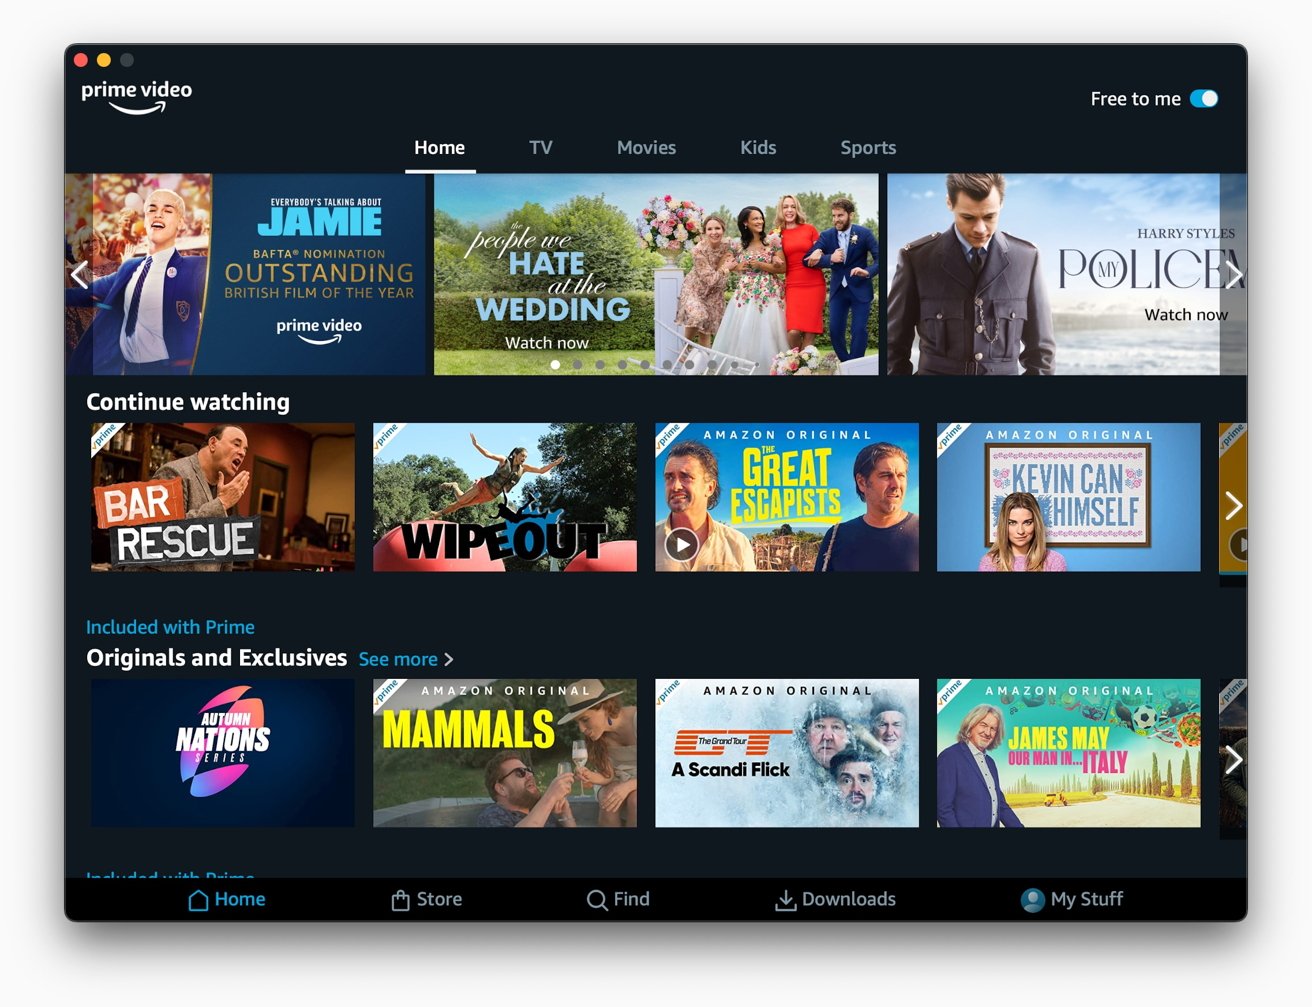 The official Amazon Prime Video app for macOS